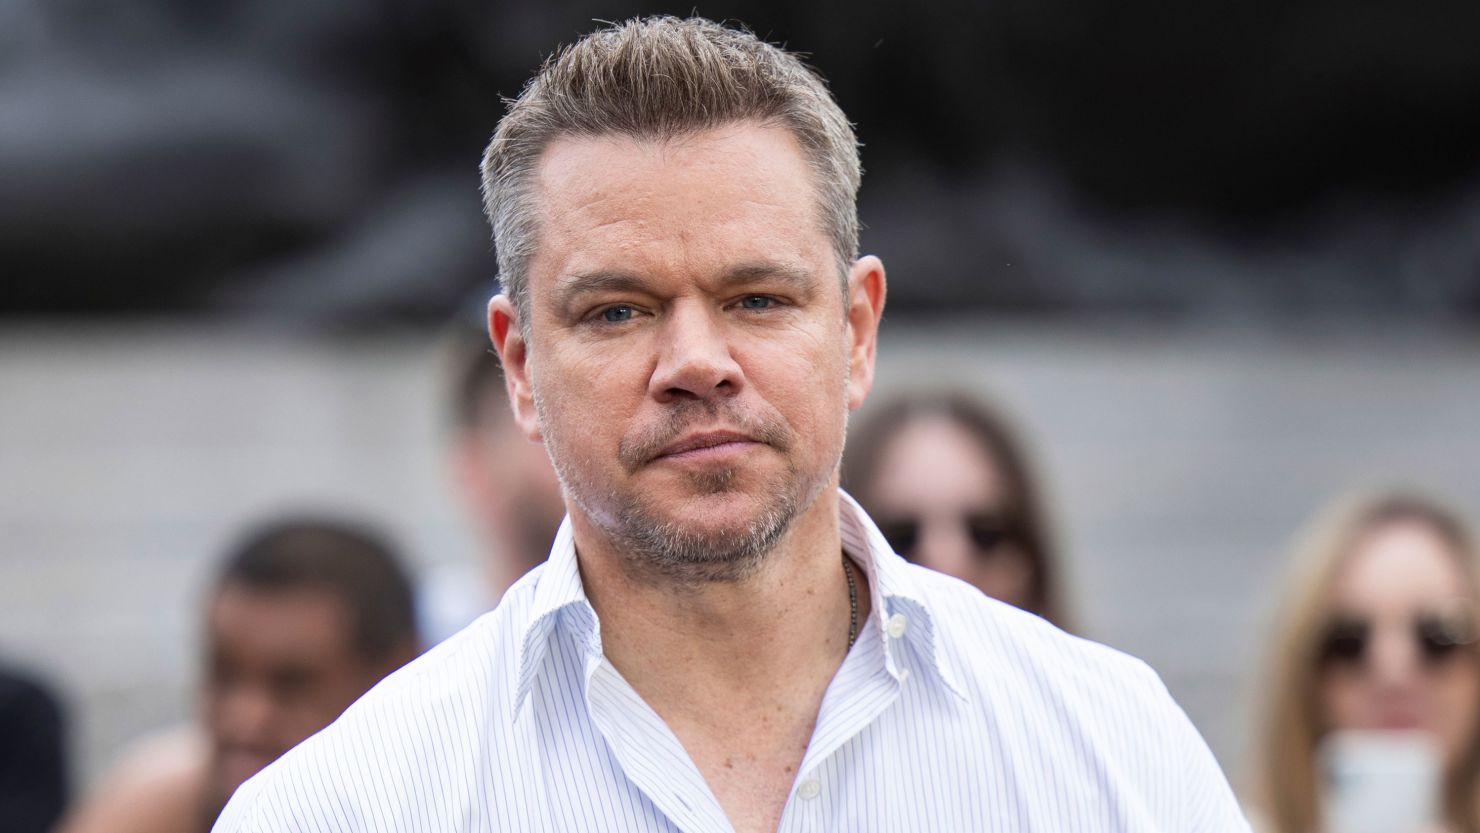 Matt Damon did not name the movie of which he detailed his experience filming.